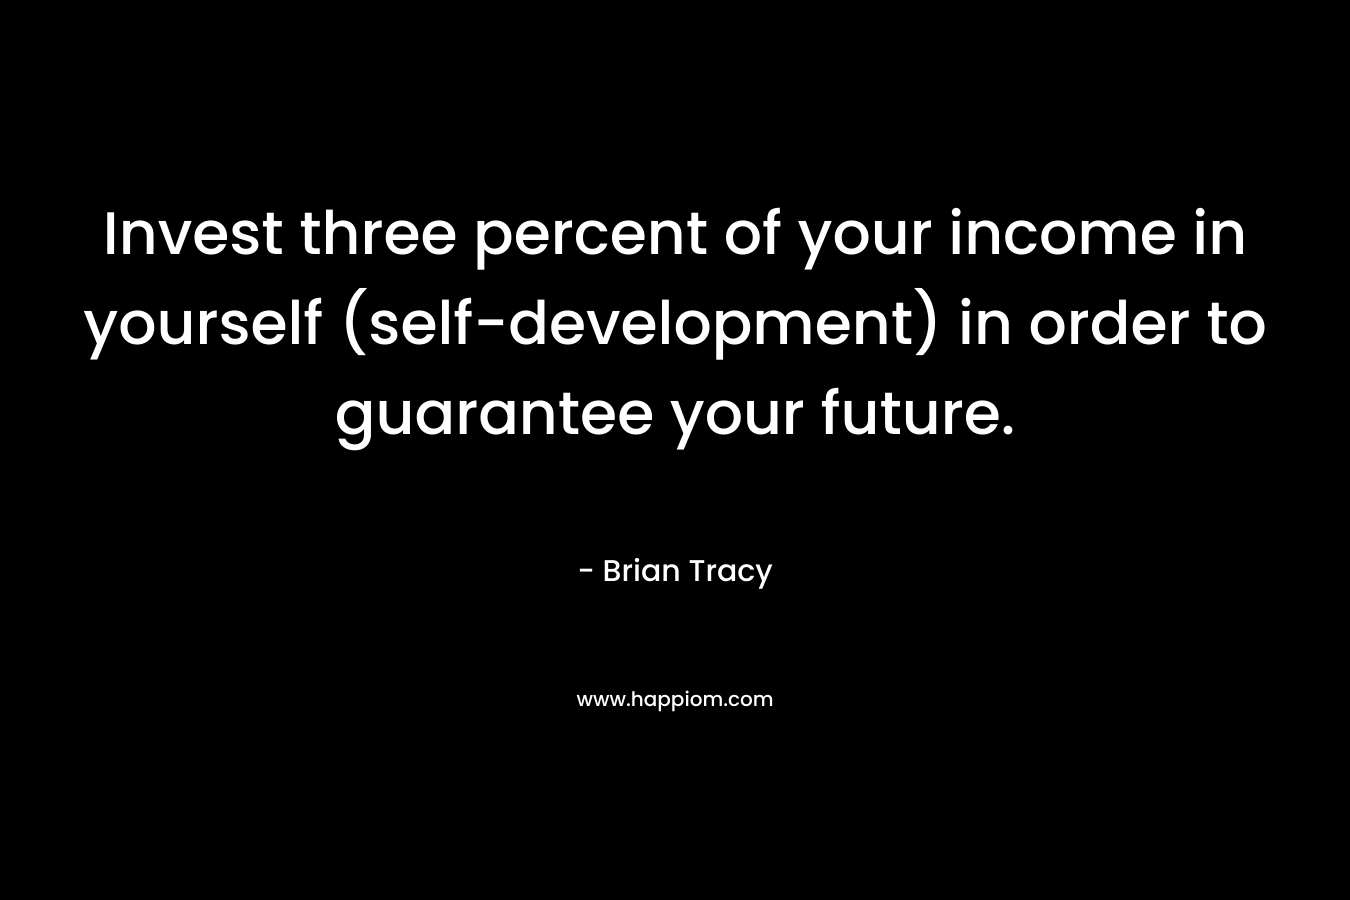 Invest three percent of your income in yourself (self-development) in order to guarantee your future. – Brian Tracy